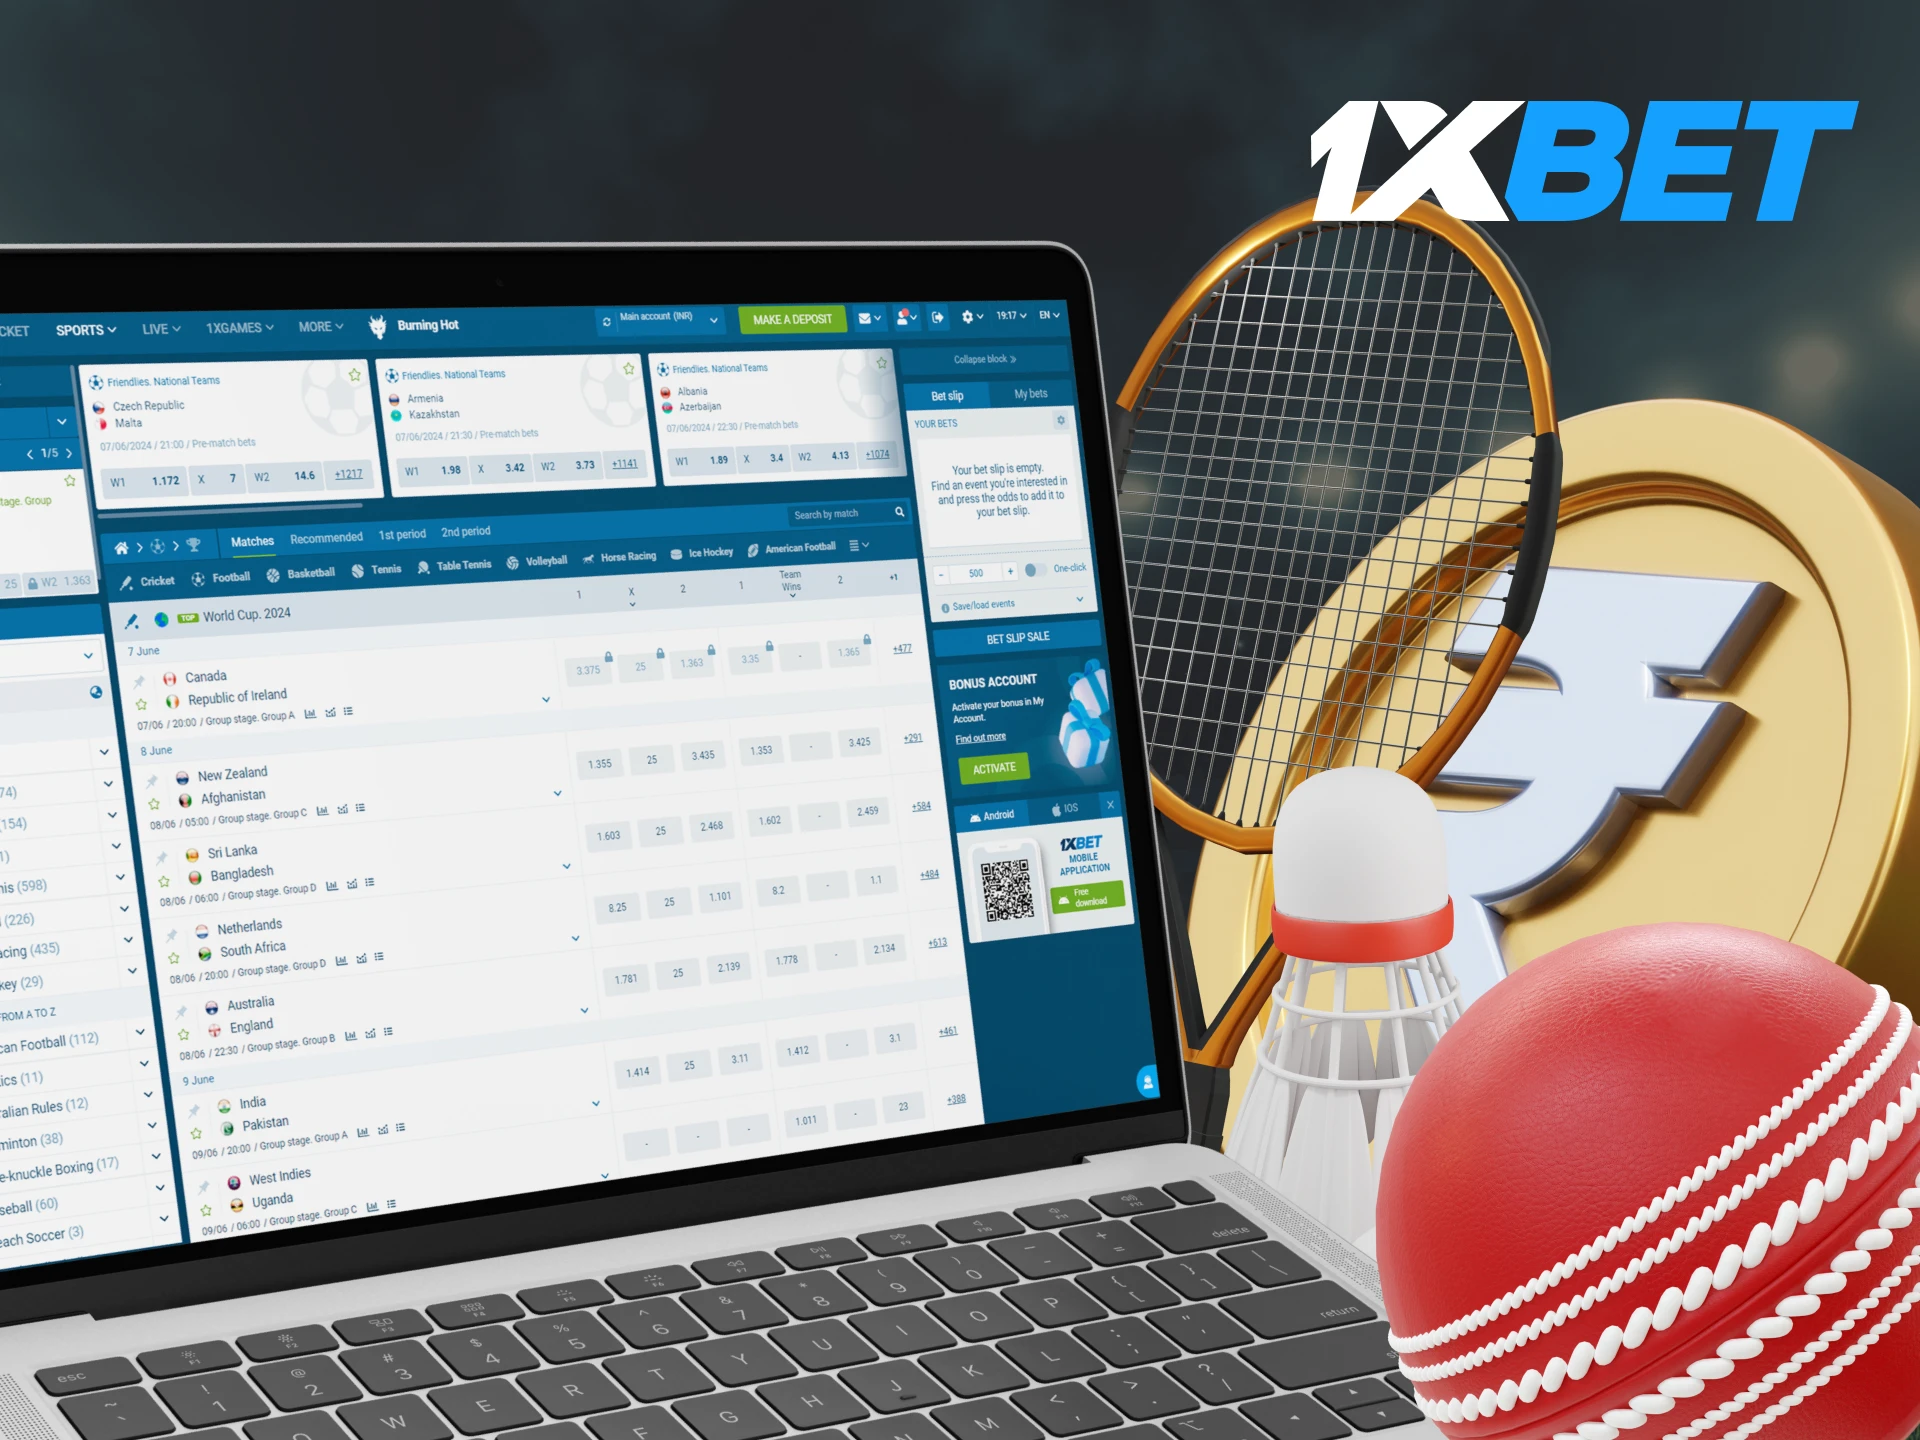 After registering at the 1xBet casino, start betting on your favorite sports.